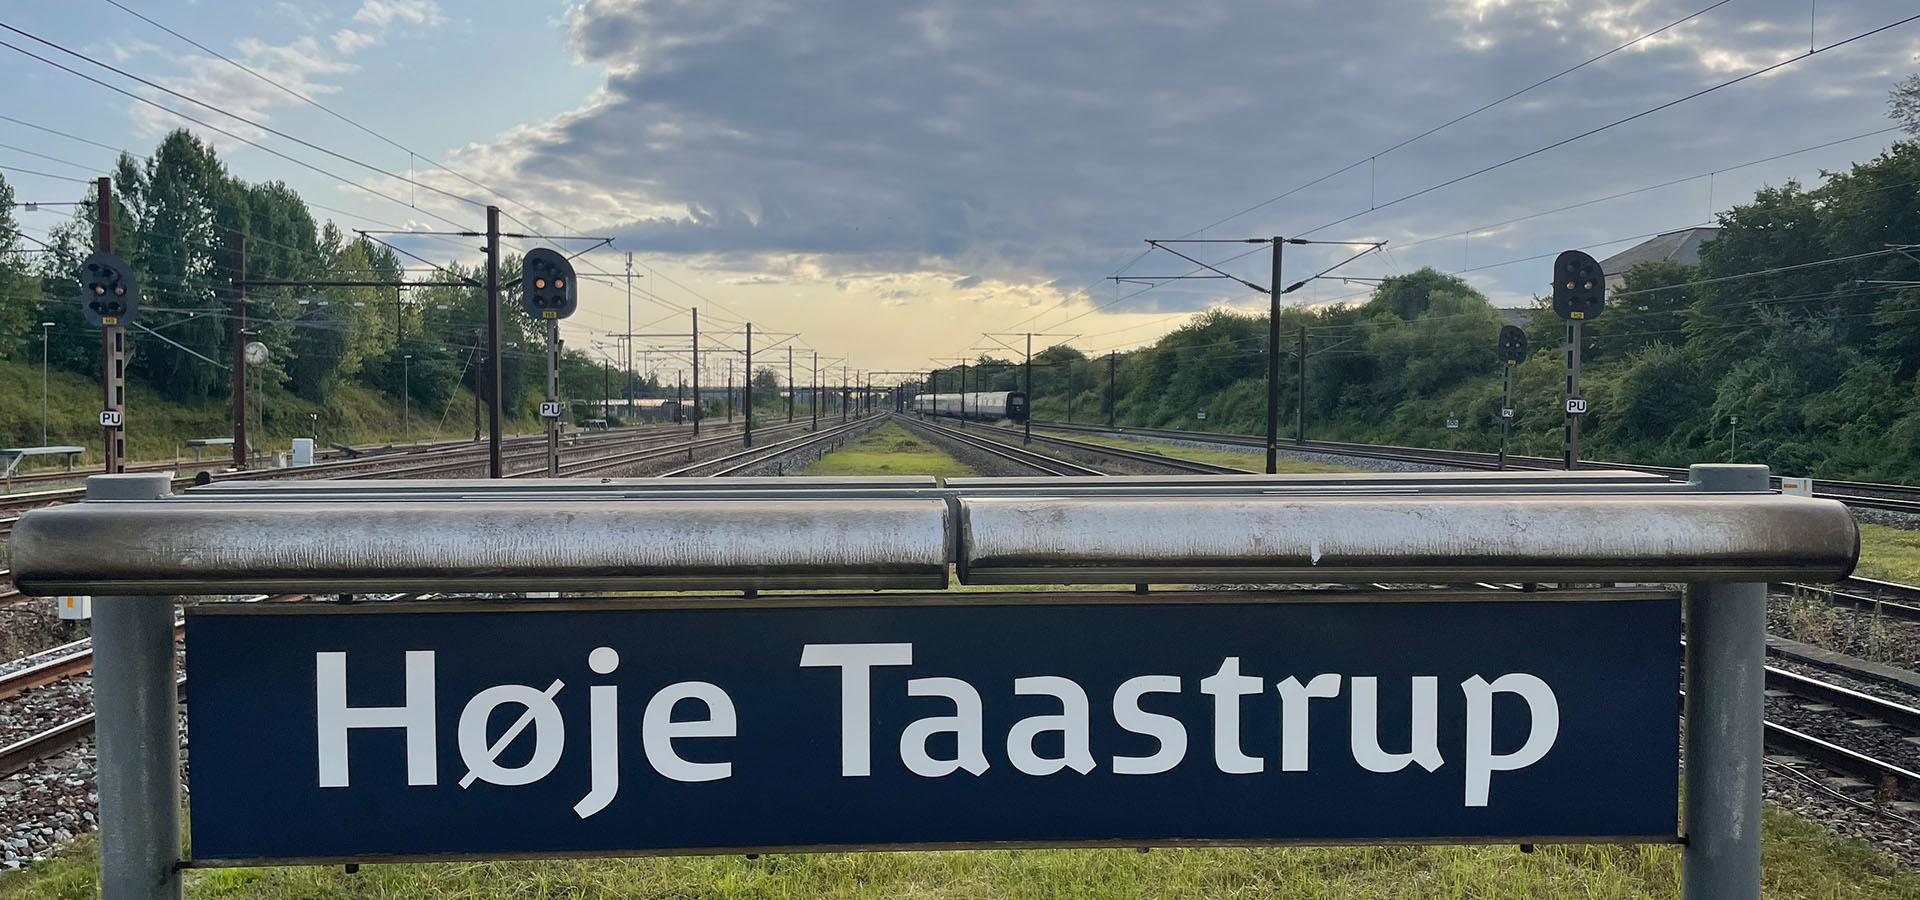 Taastrup haveservice